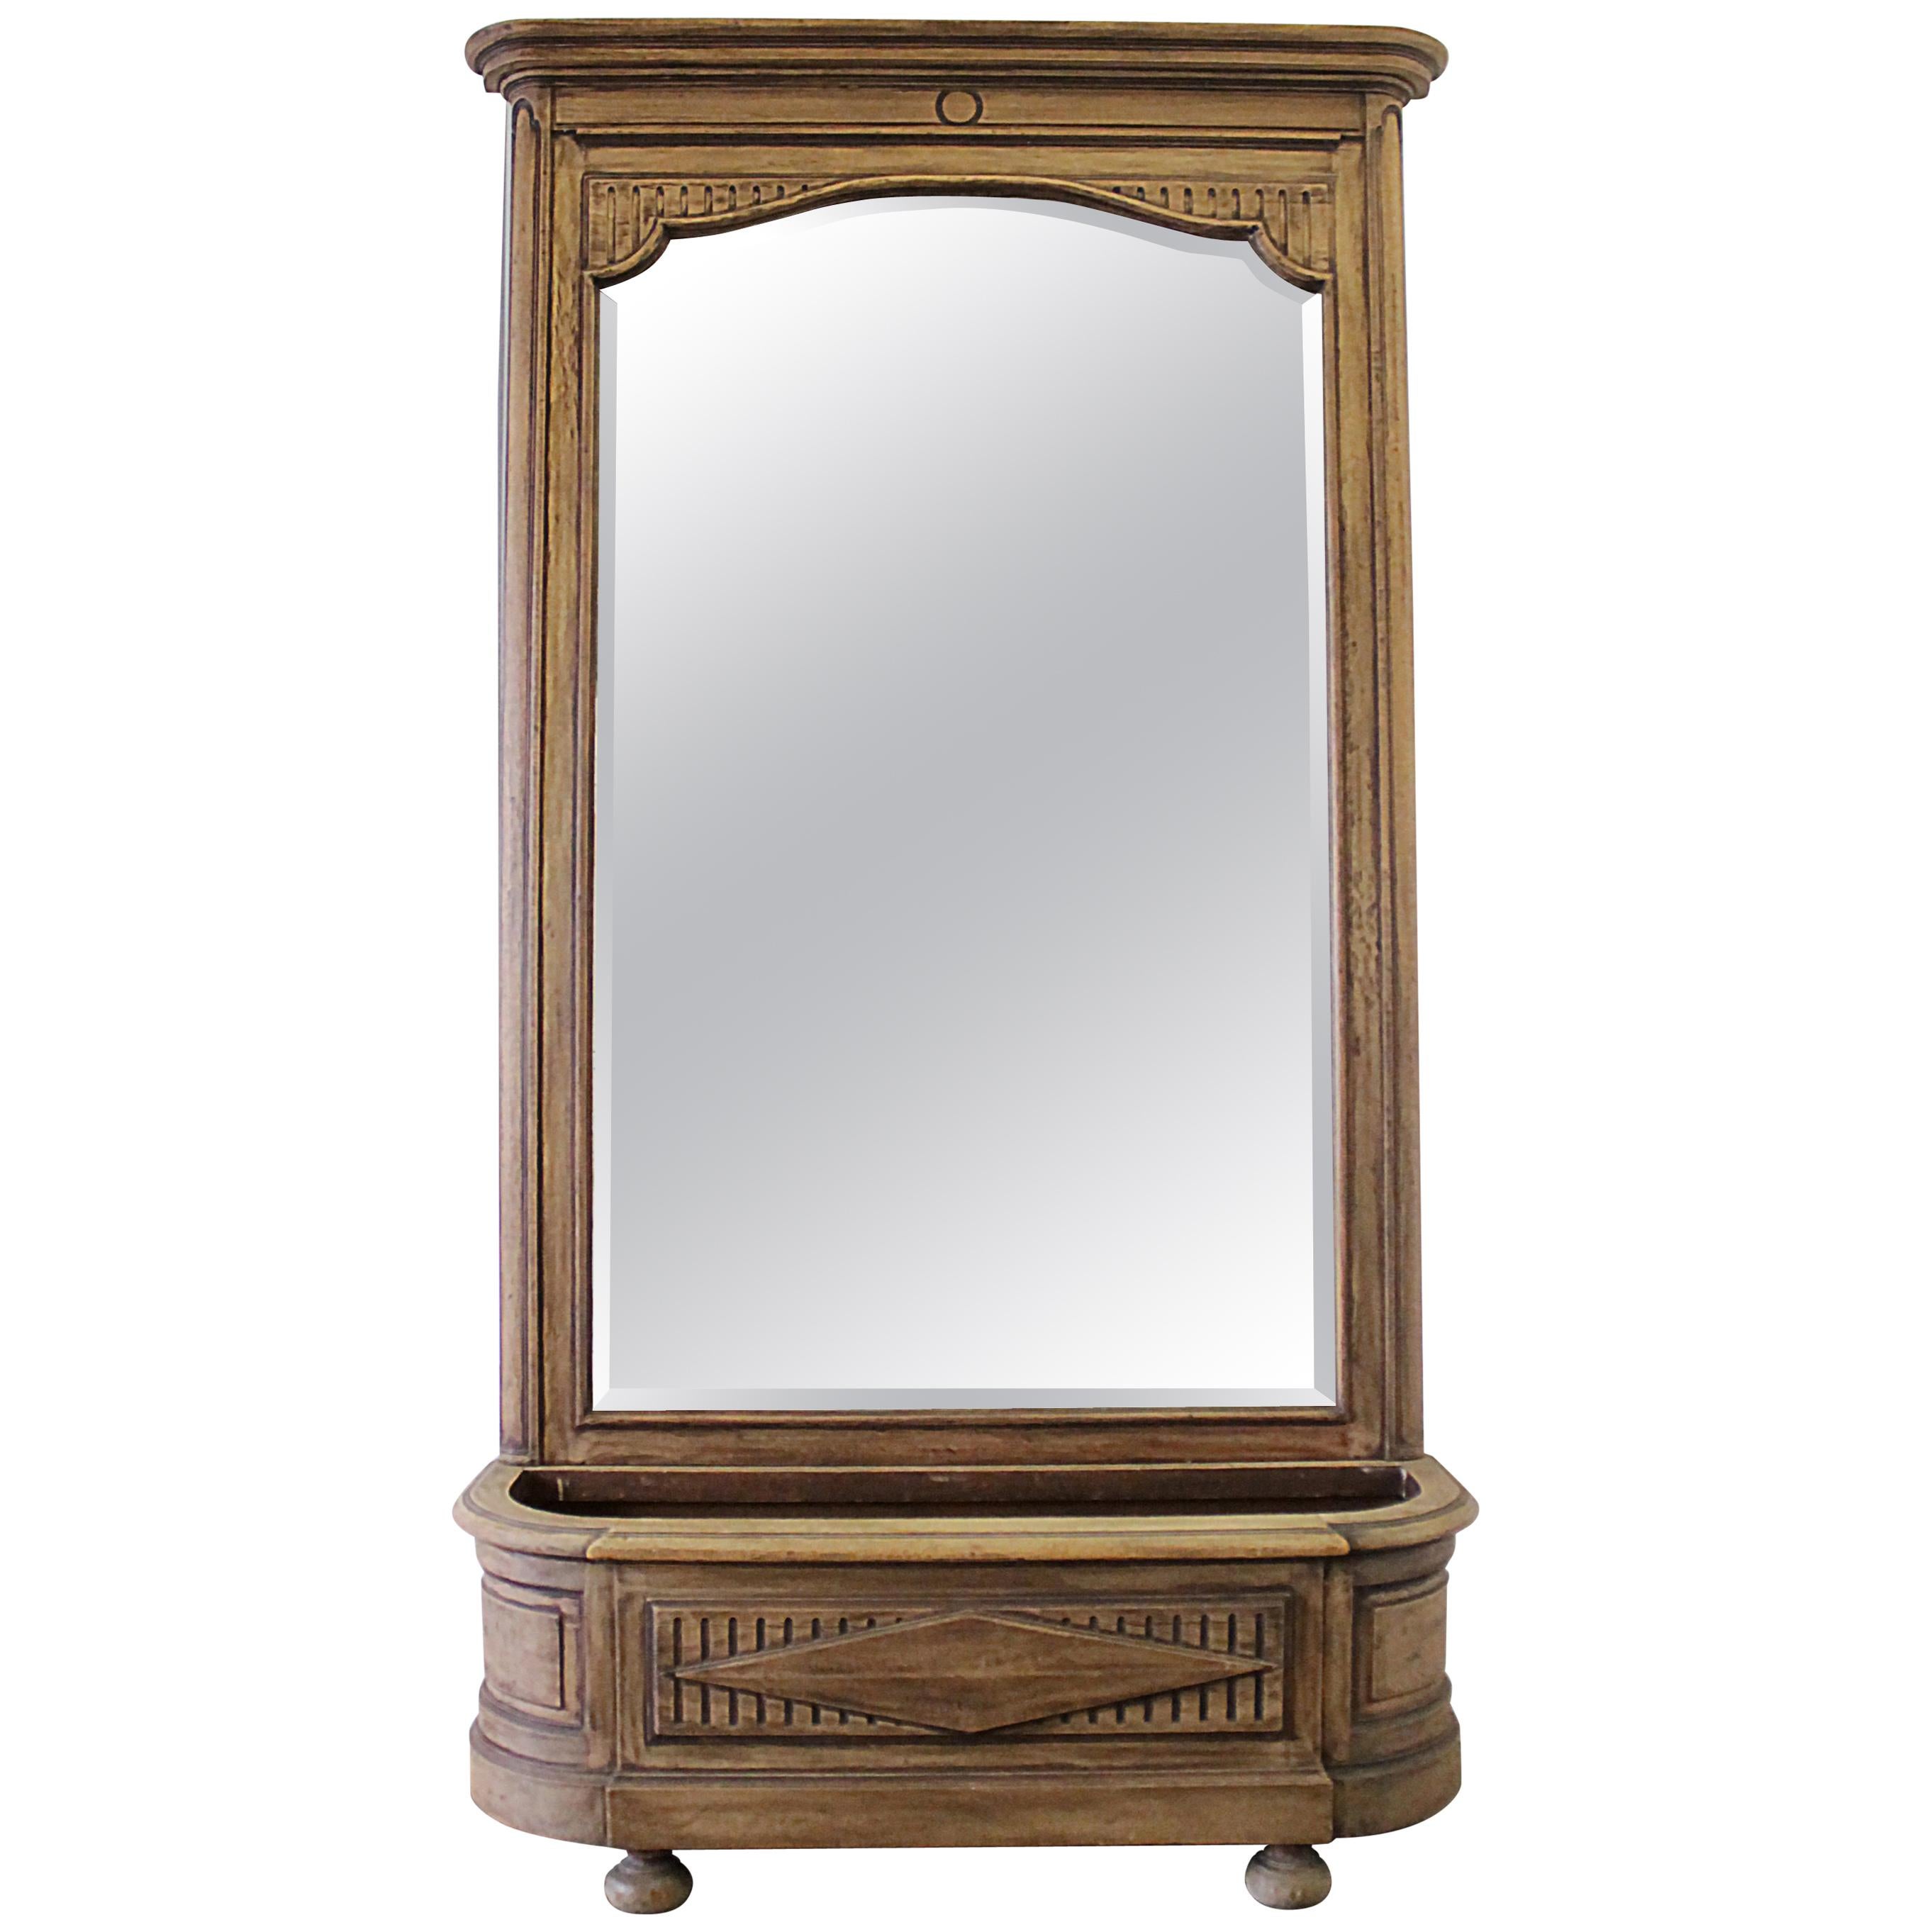 Early 20th Century Italian Trumeau Mirror with Planter Stand